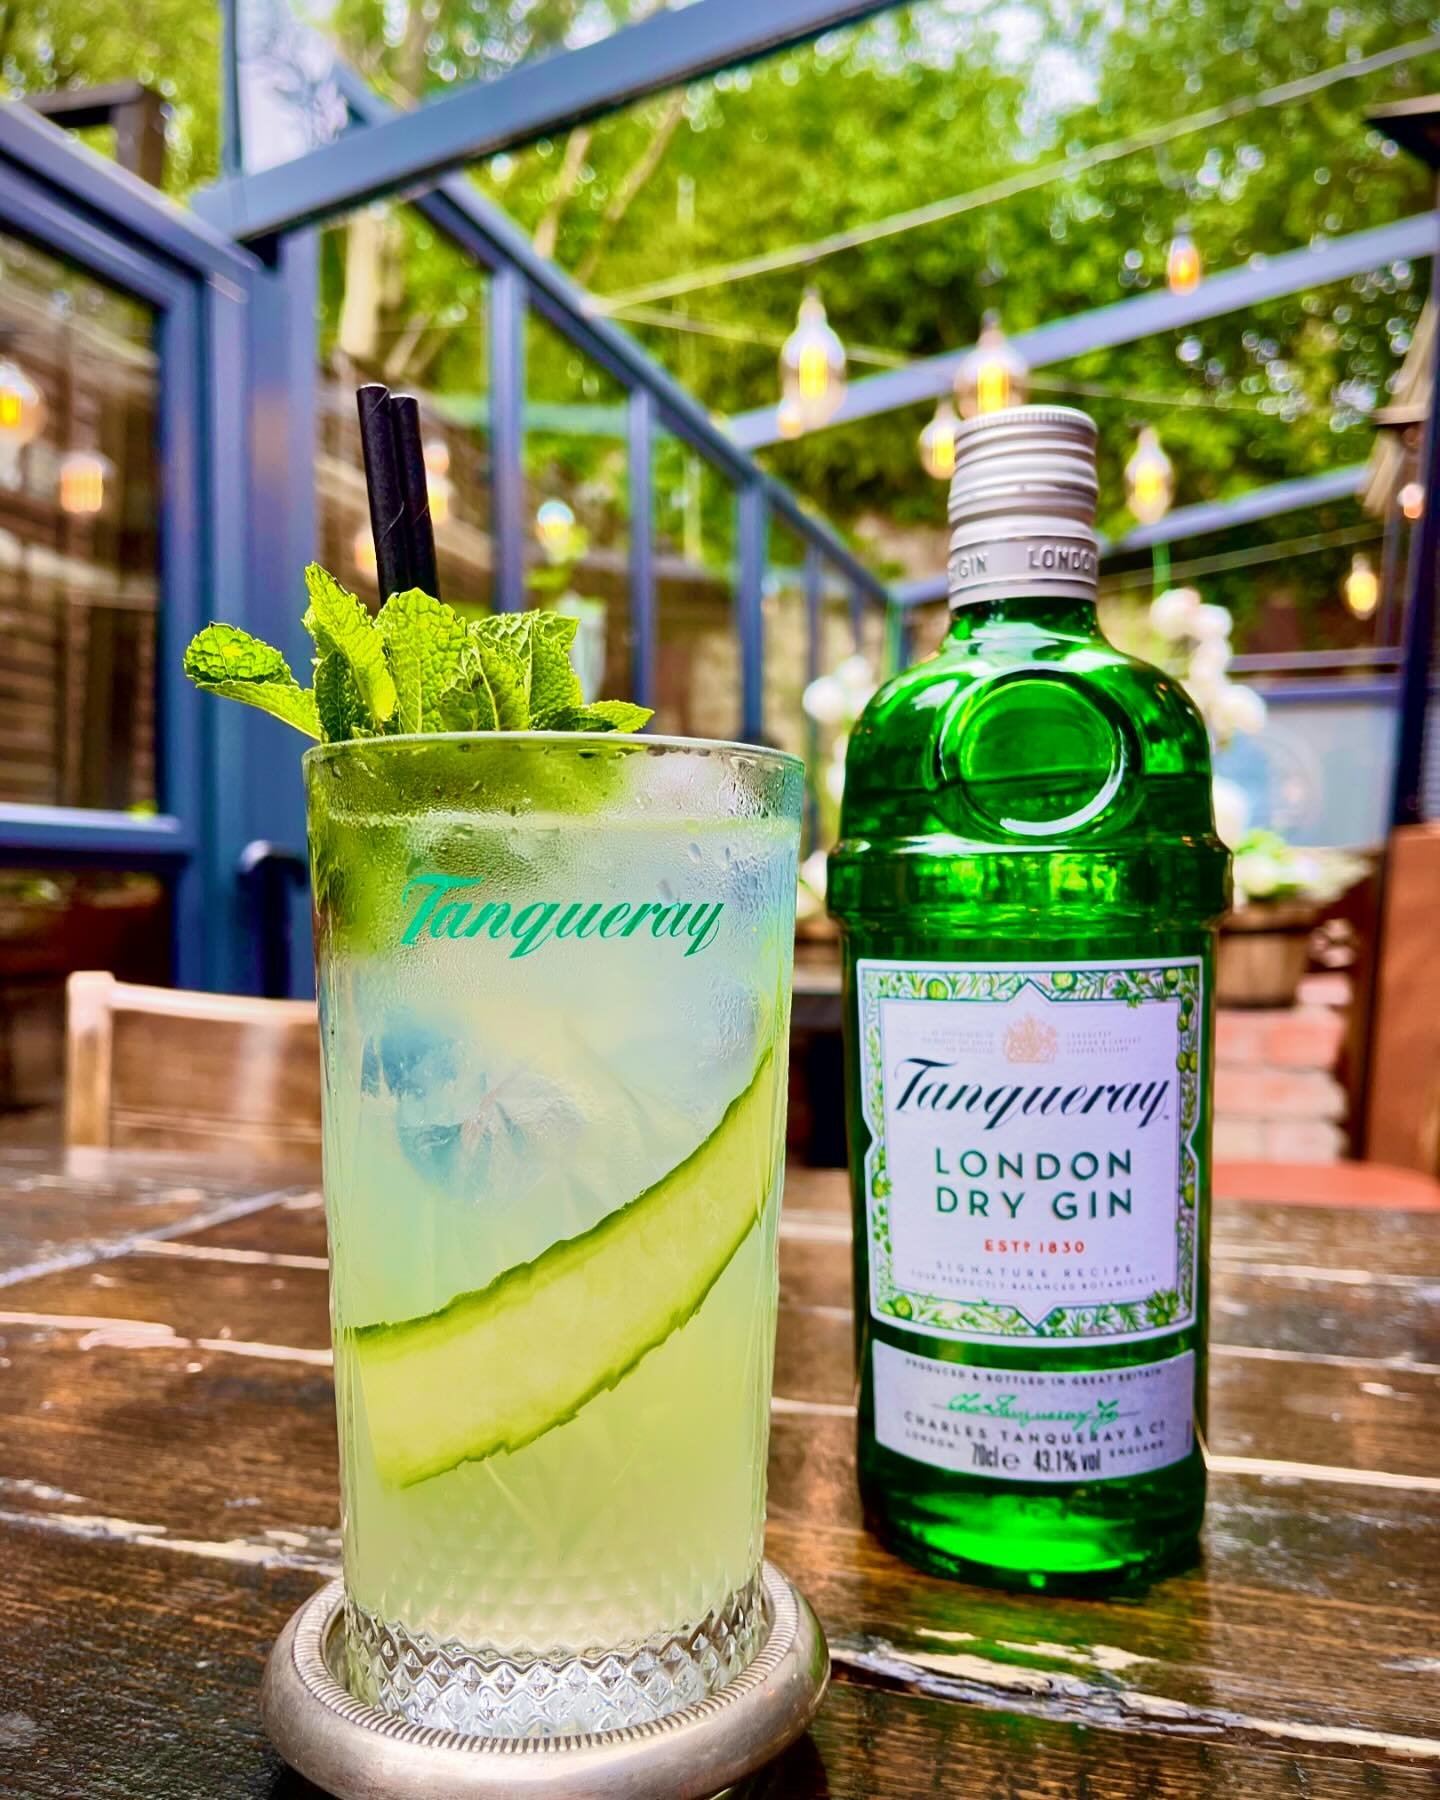 The Week&rsquo;s New Signature Cocktail 🍸~ &ldquo;Green Garden&rdquo; 🌞🌴
Tanqueray Gin, Pear, Cucumber &amp; Lime Juice, White Vermouth &amp; Soda Water #buffaloboysteakhouse #carrickonshannon #leitrim #tanqueray